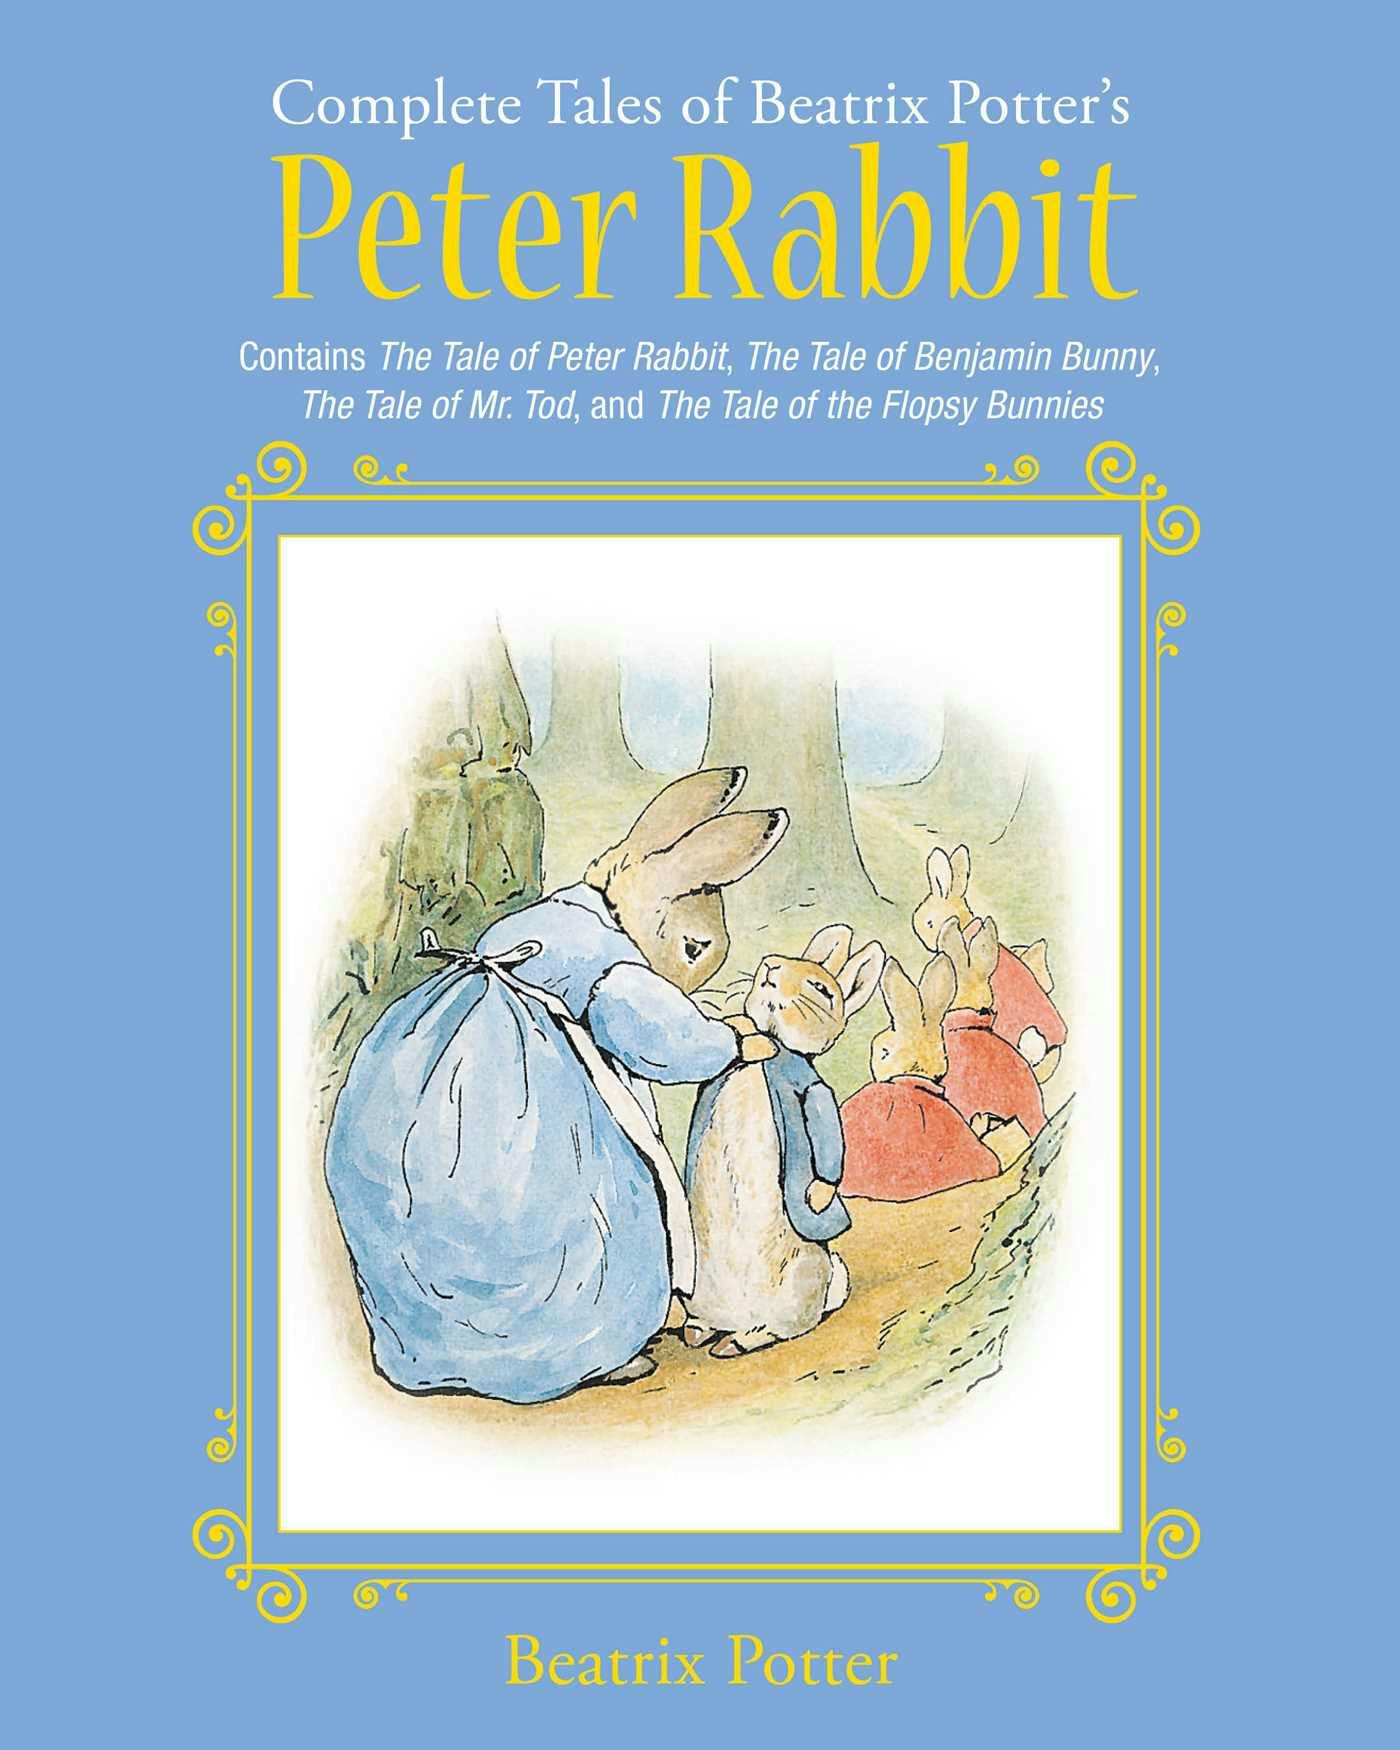 The Complete Tales of Beatrix Potter's Peter Rabbit: Contains The Tale of Peter Rabbit, The Tale of Benjamin Bunny, The Tale of Mr. Tod, and The Tale of the Flopsy Bunnies - Beatrix Potter